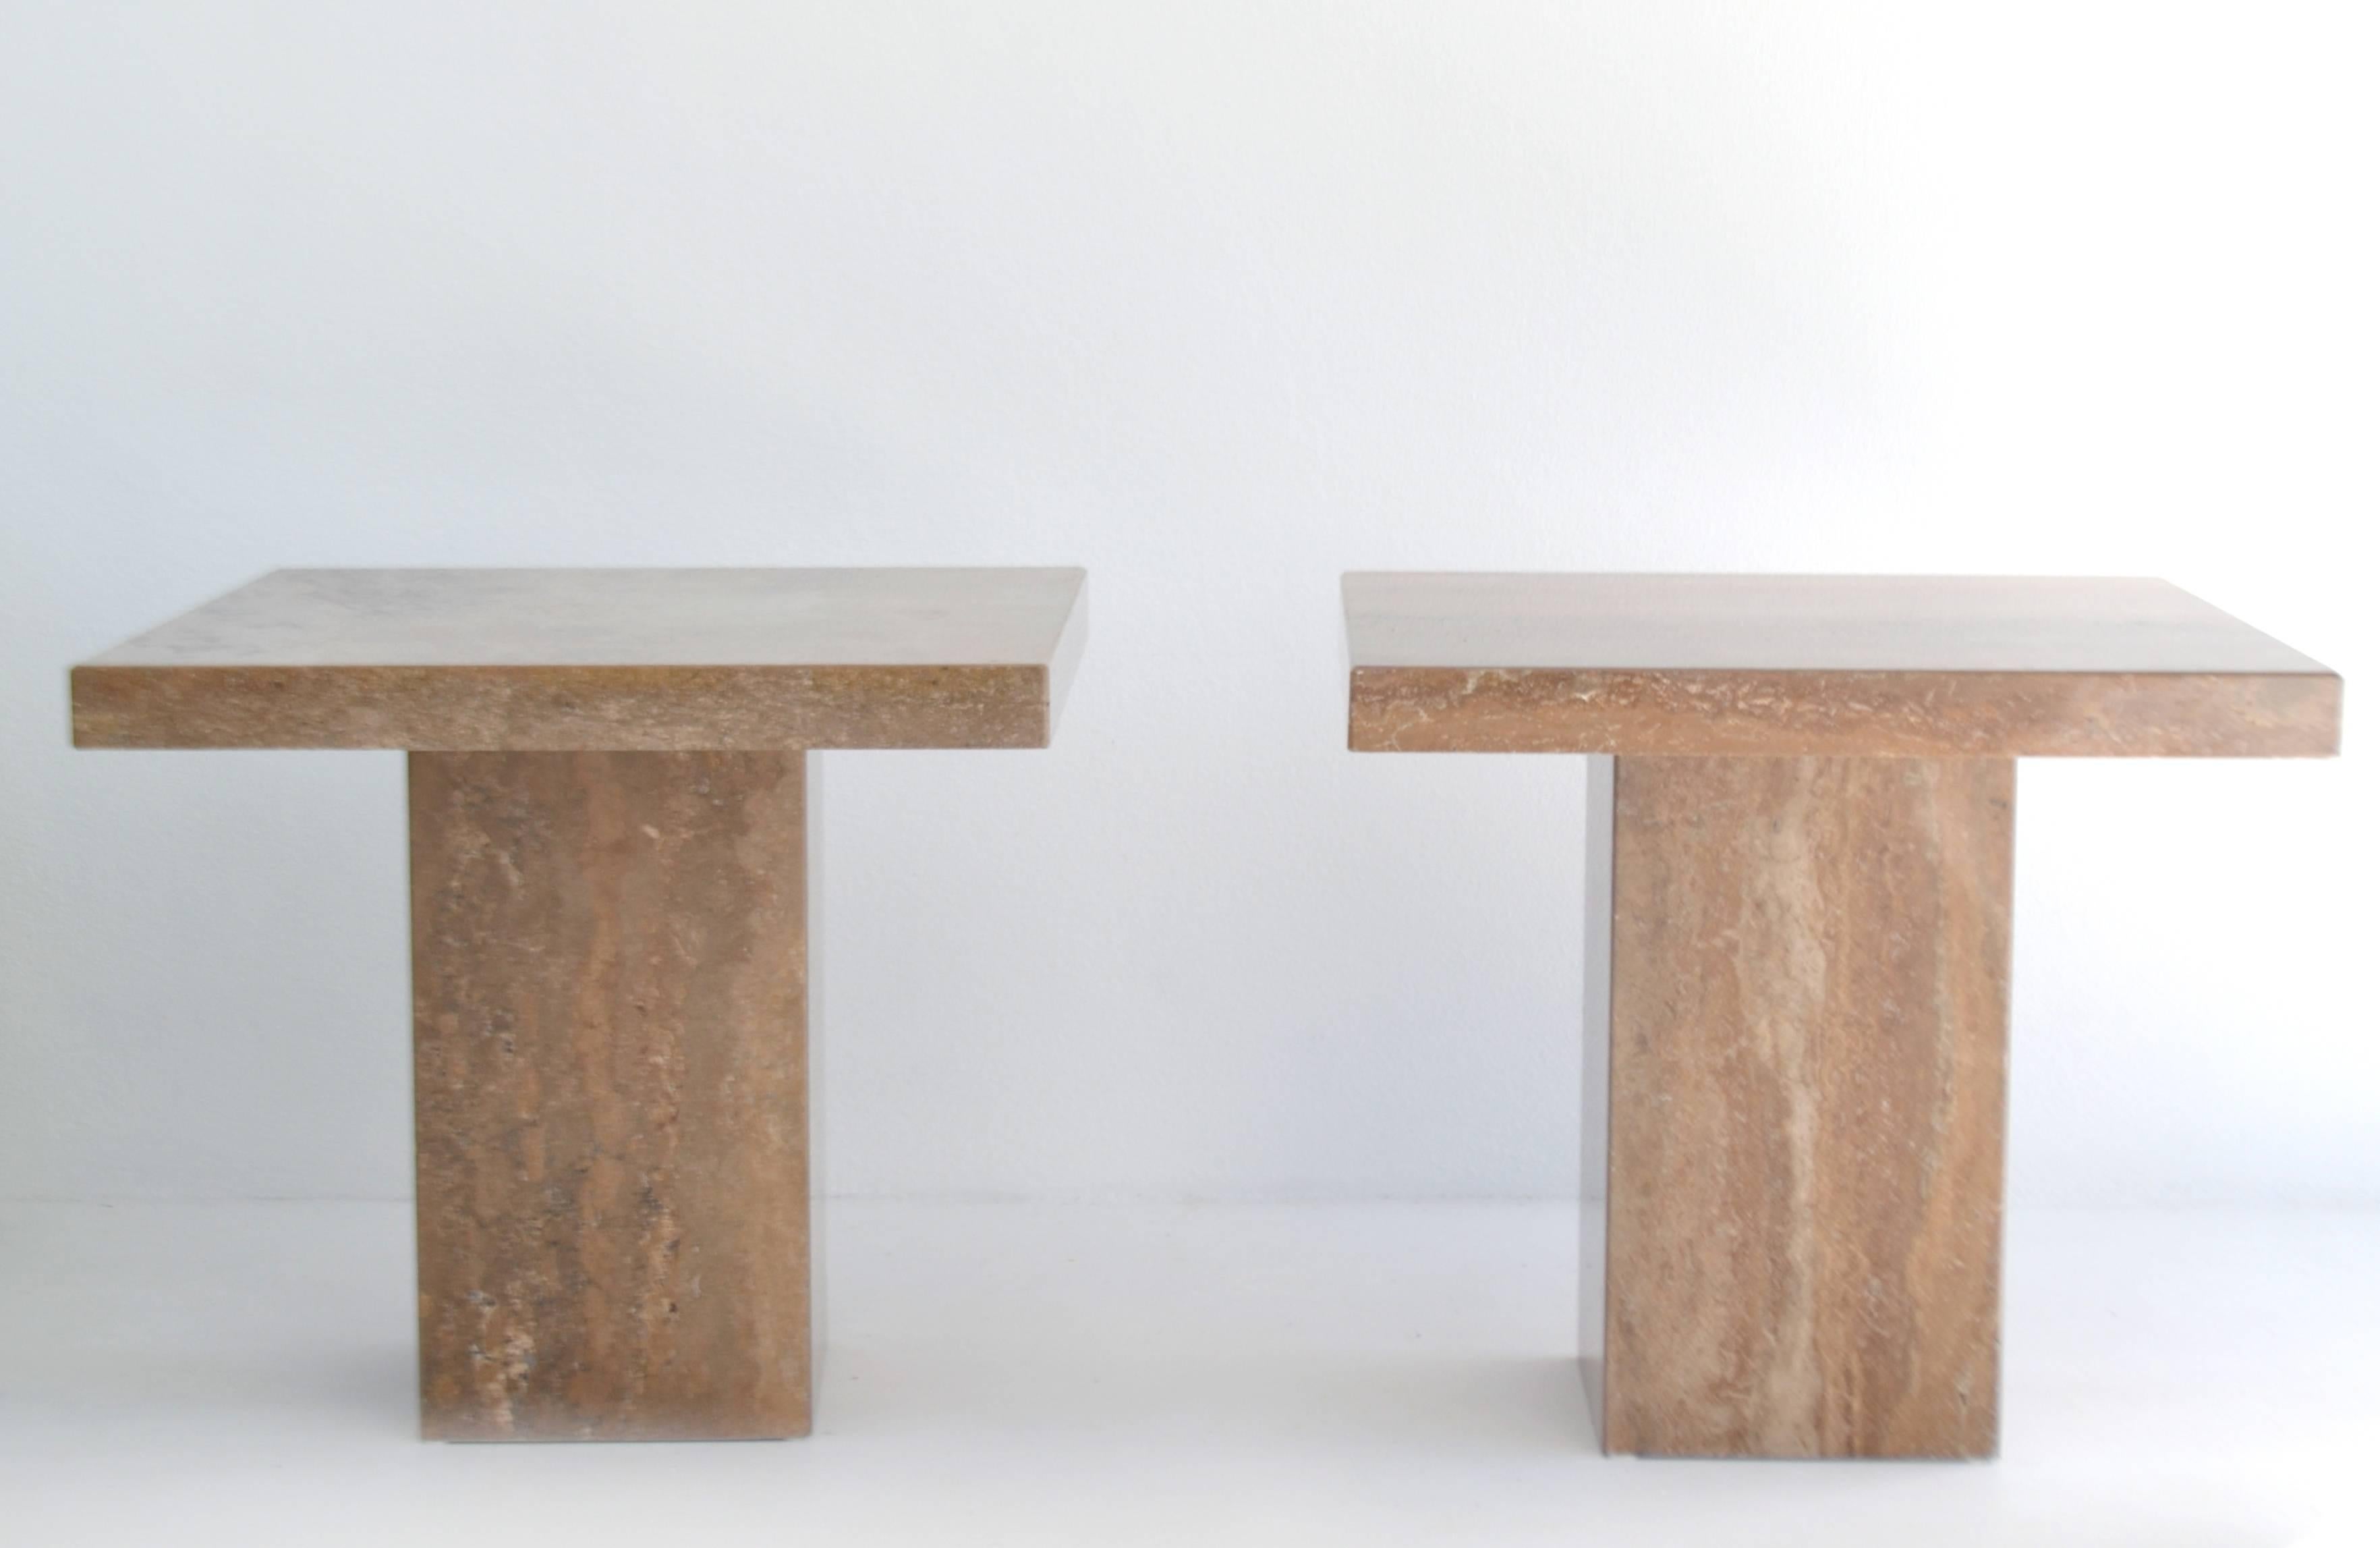 Pair of Italian Postmodern travertine side tables in the style of Willy Rizzo, circa 1970s-1980s. These striking square top travertine marble end tables nightstands are mounted on travertine marble plinth bases.

Measurements:
Overall 24.75